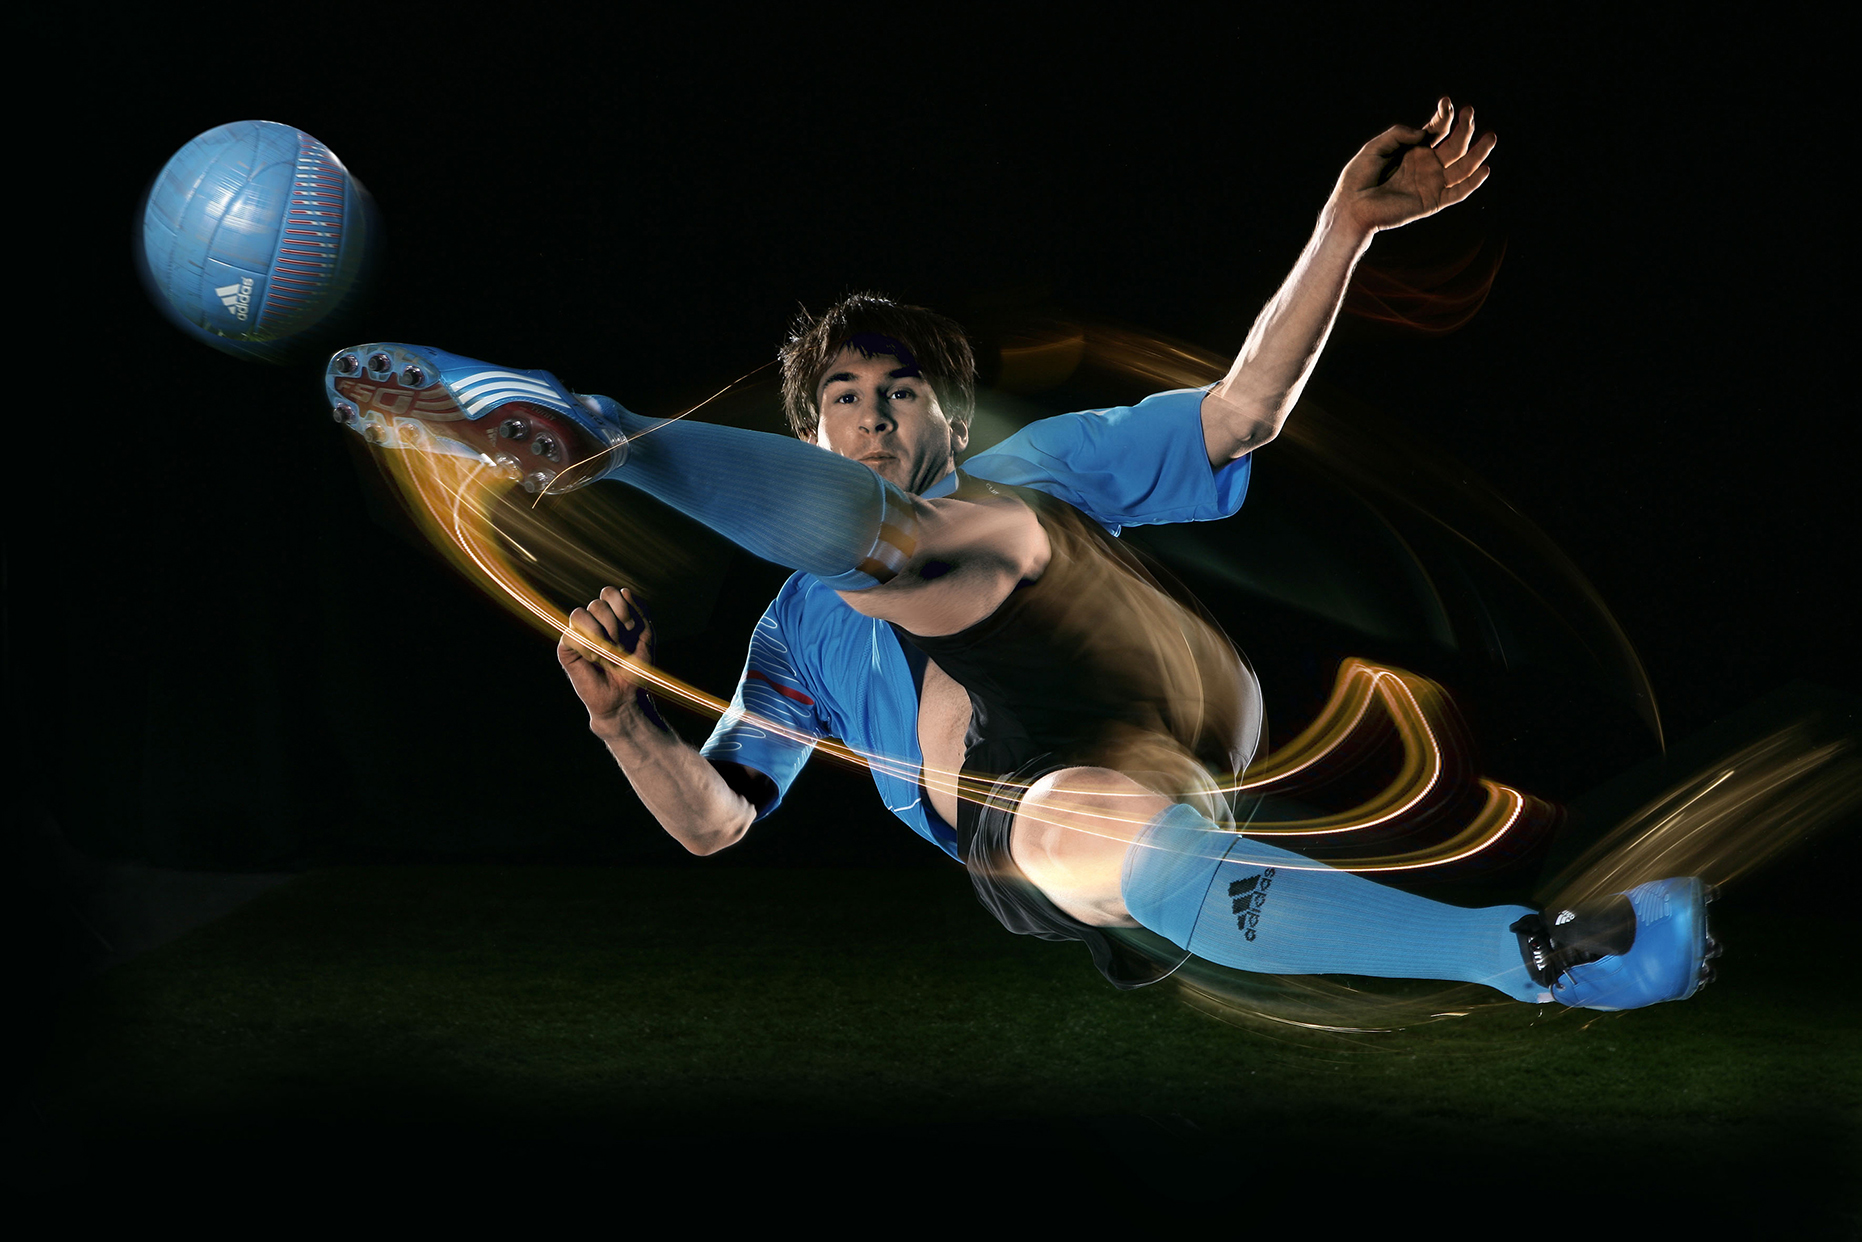 Lionel Messi for adidas